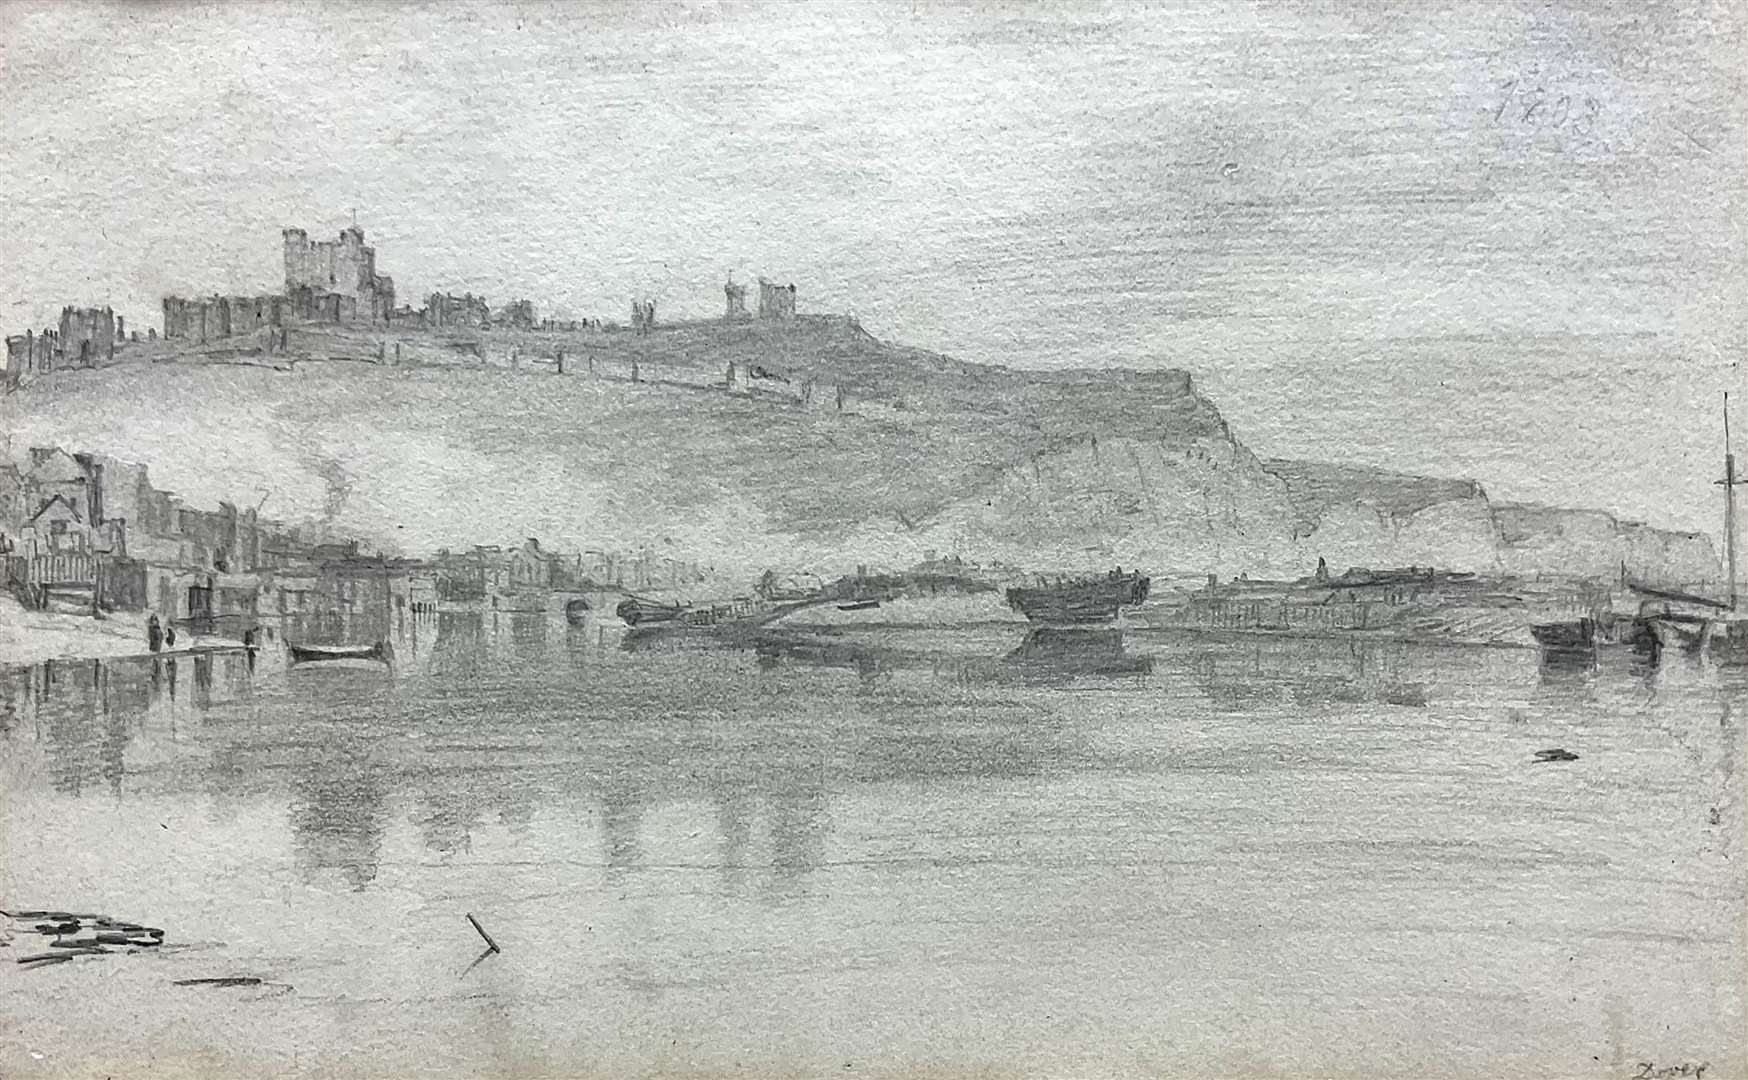 The John Constable sketch of Dover Harbour in was made in 1803